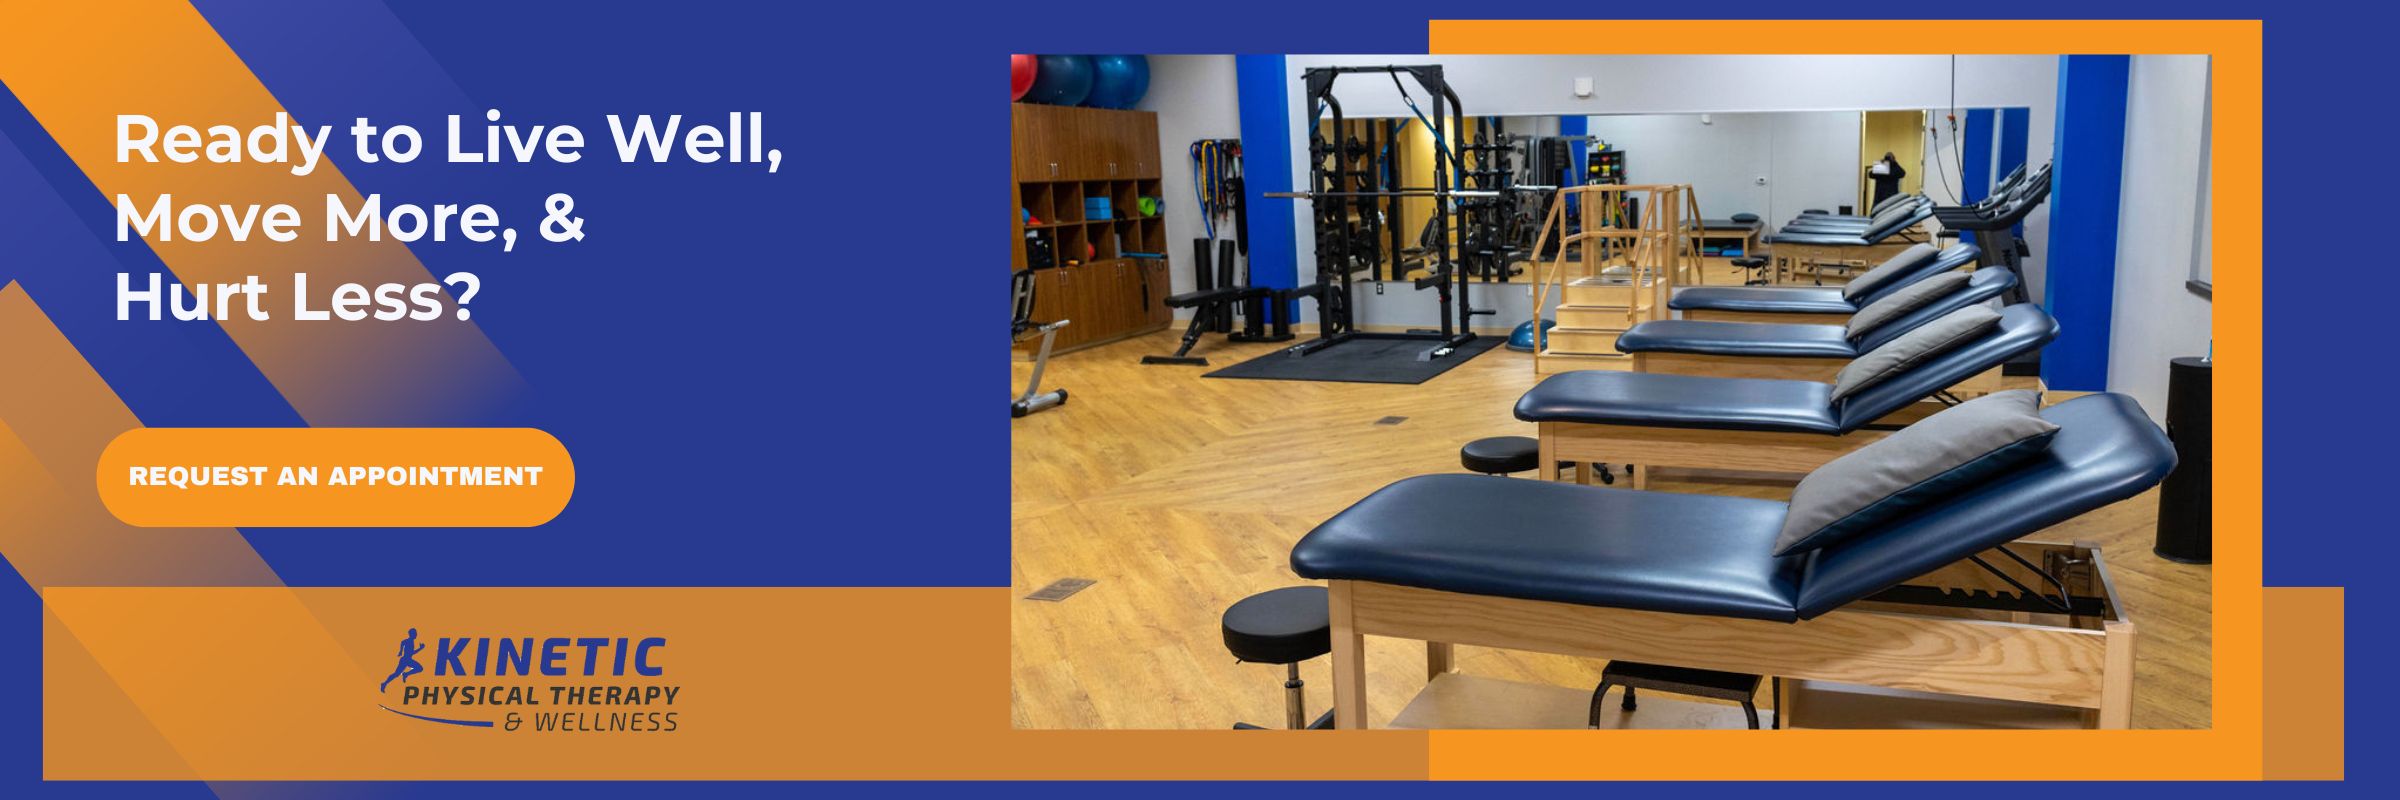 Kinetic Physical Therapy Directory Listings